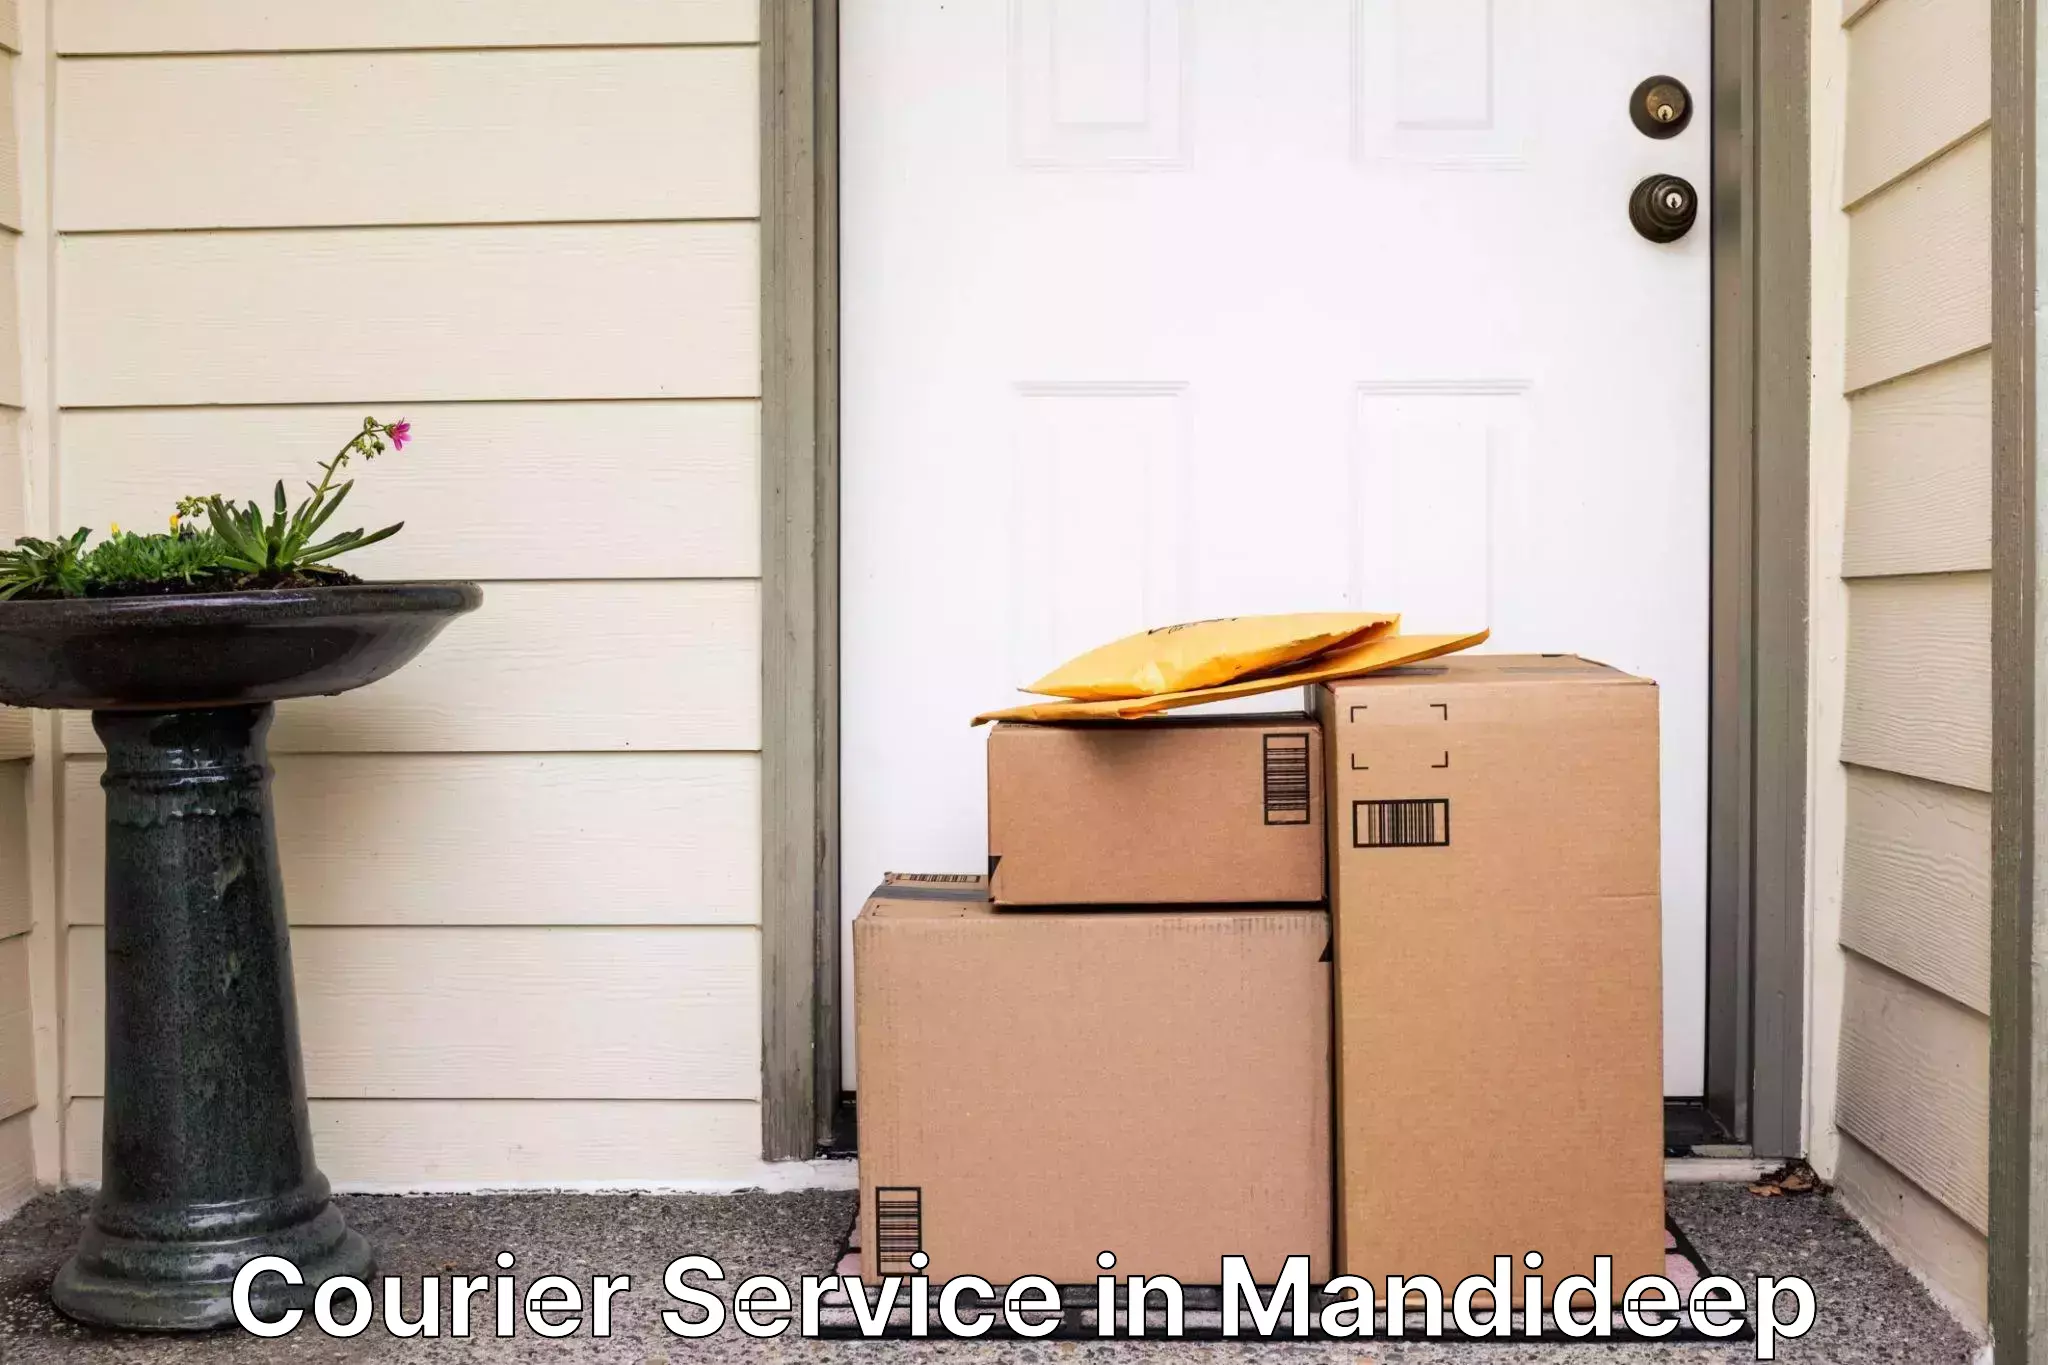 Parcel handling and care in Mandideep